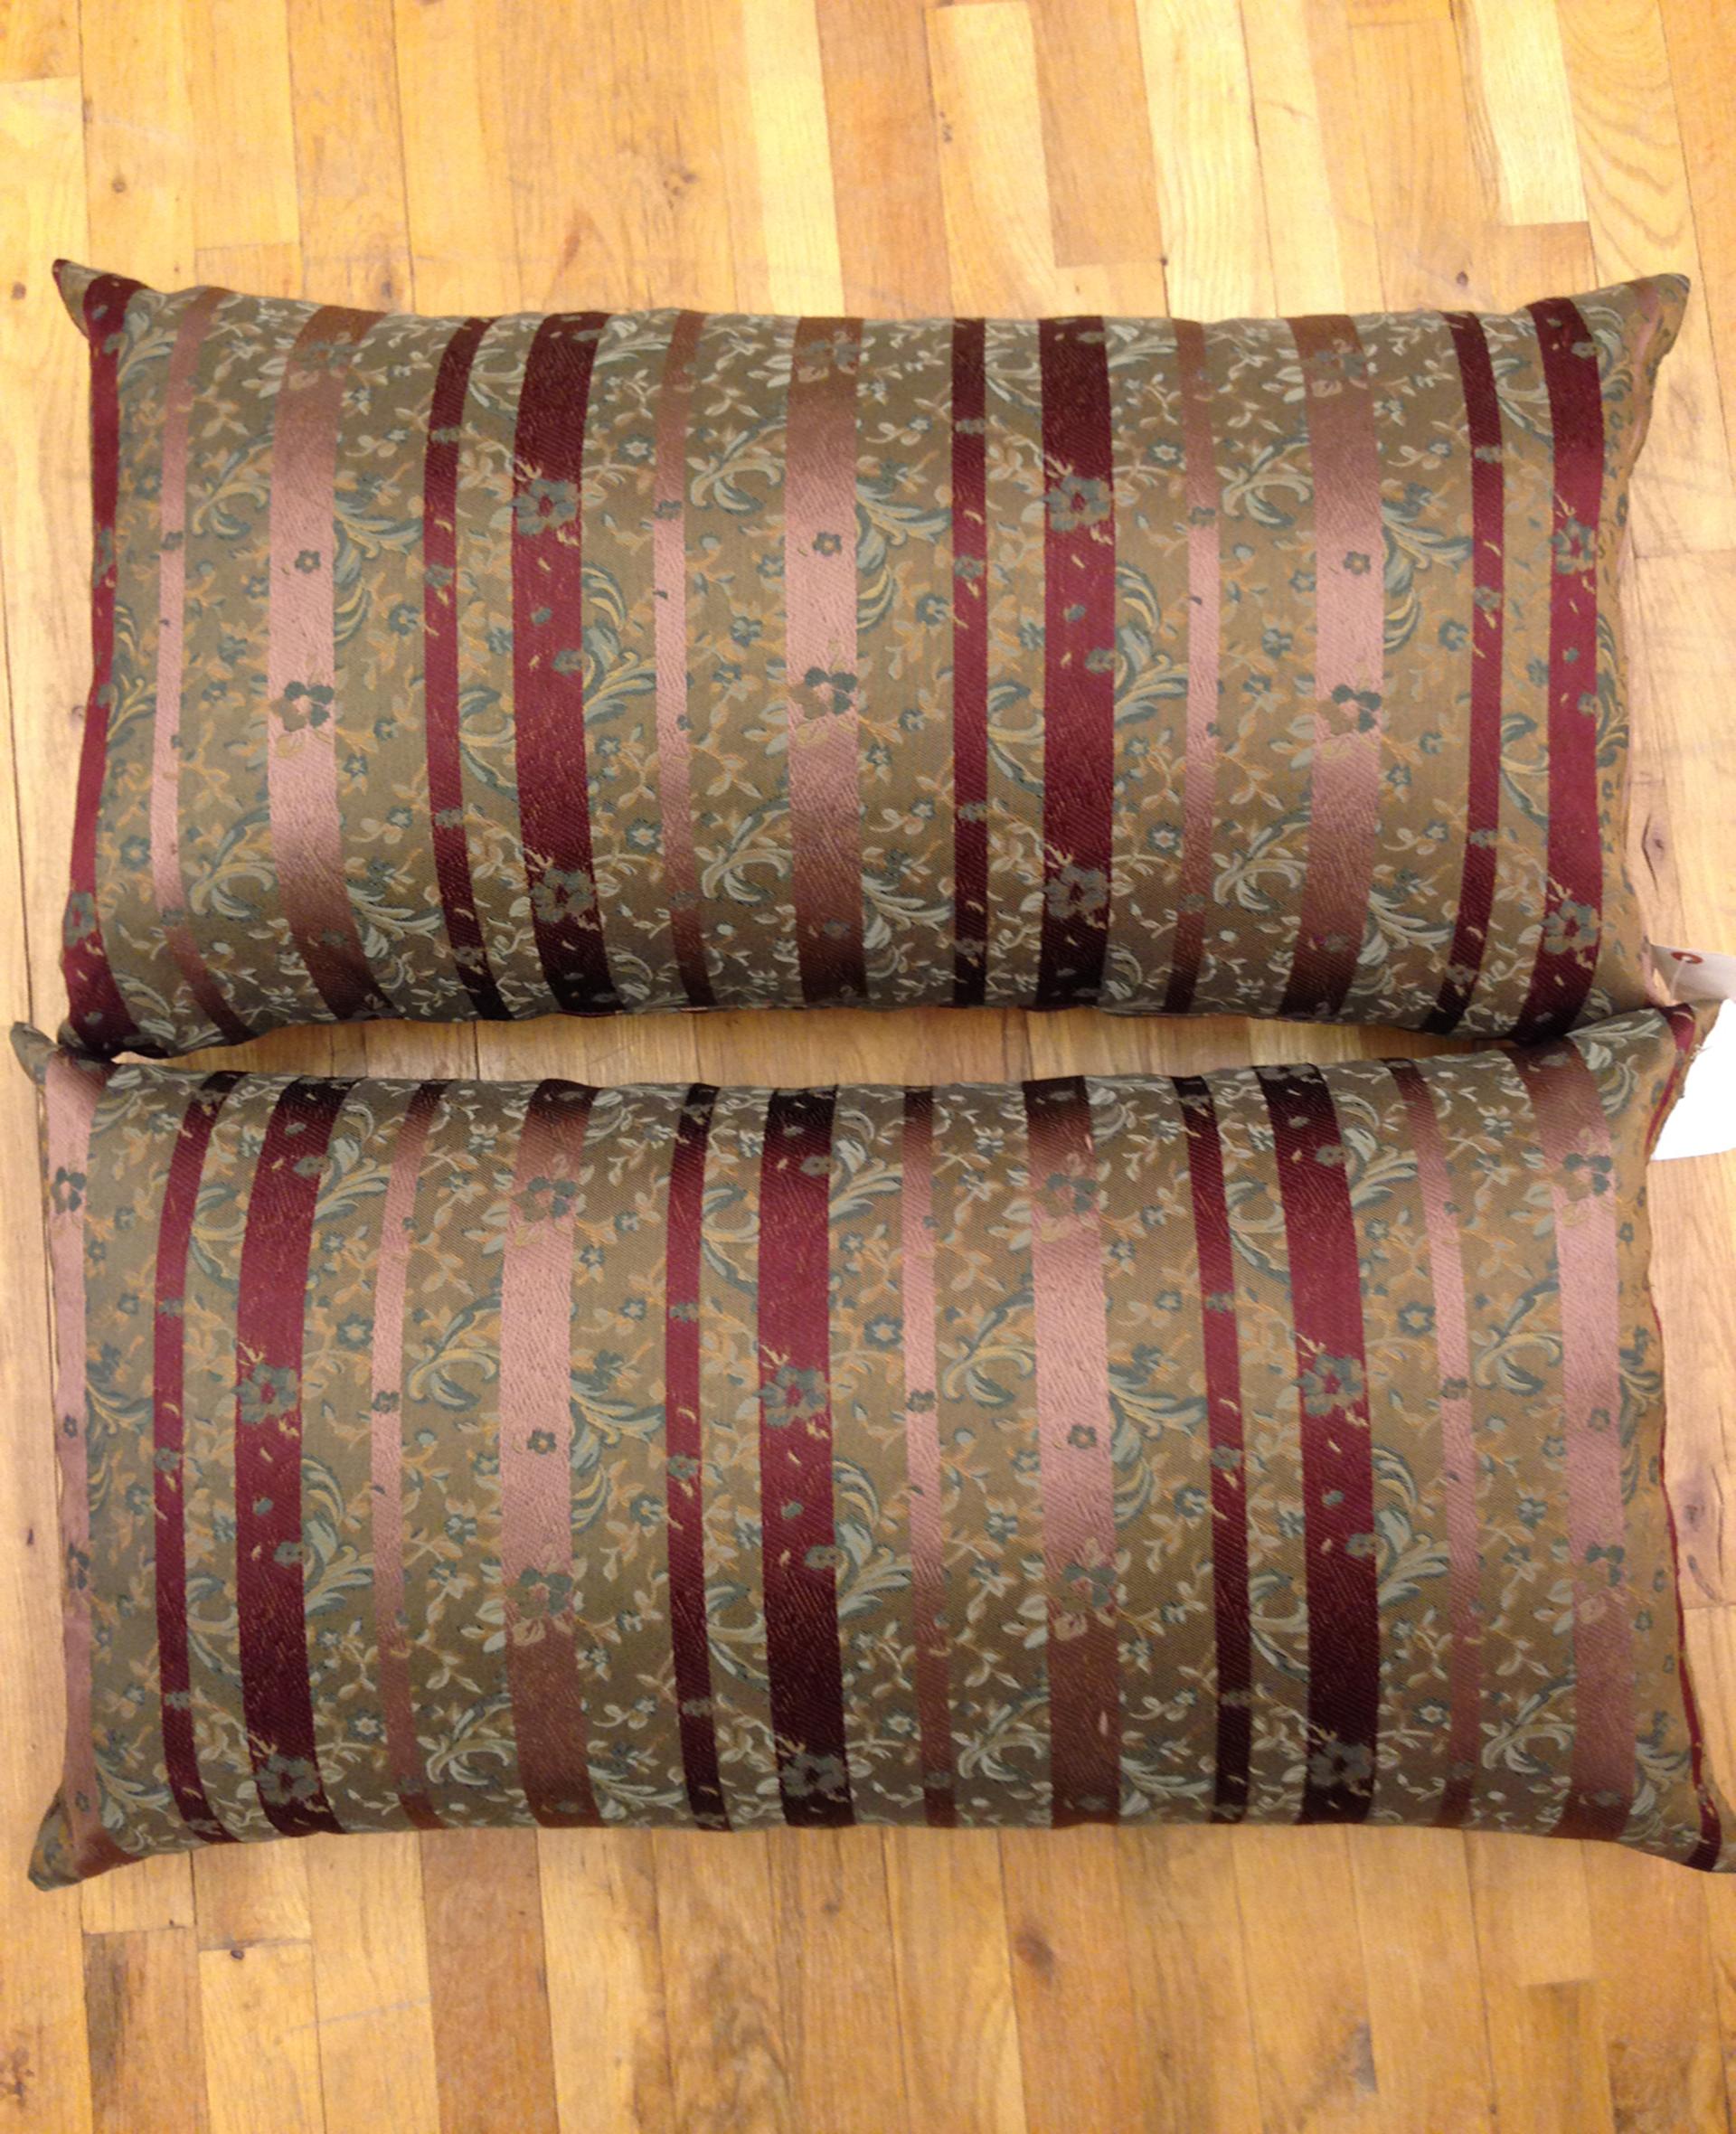 A pair of large decorative satin pillows, covered on both sides with a vintage striped brocade, size 18 inch x 34 inch each. This pair of oversize pillows are a great choice to add oomph, color and texture to your decor. The exterior features a